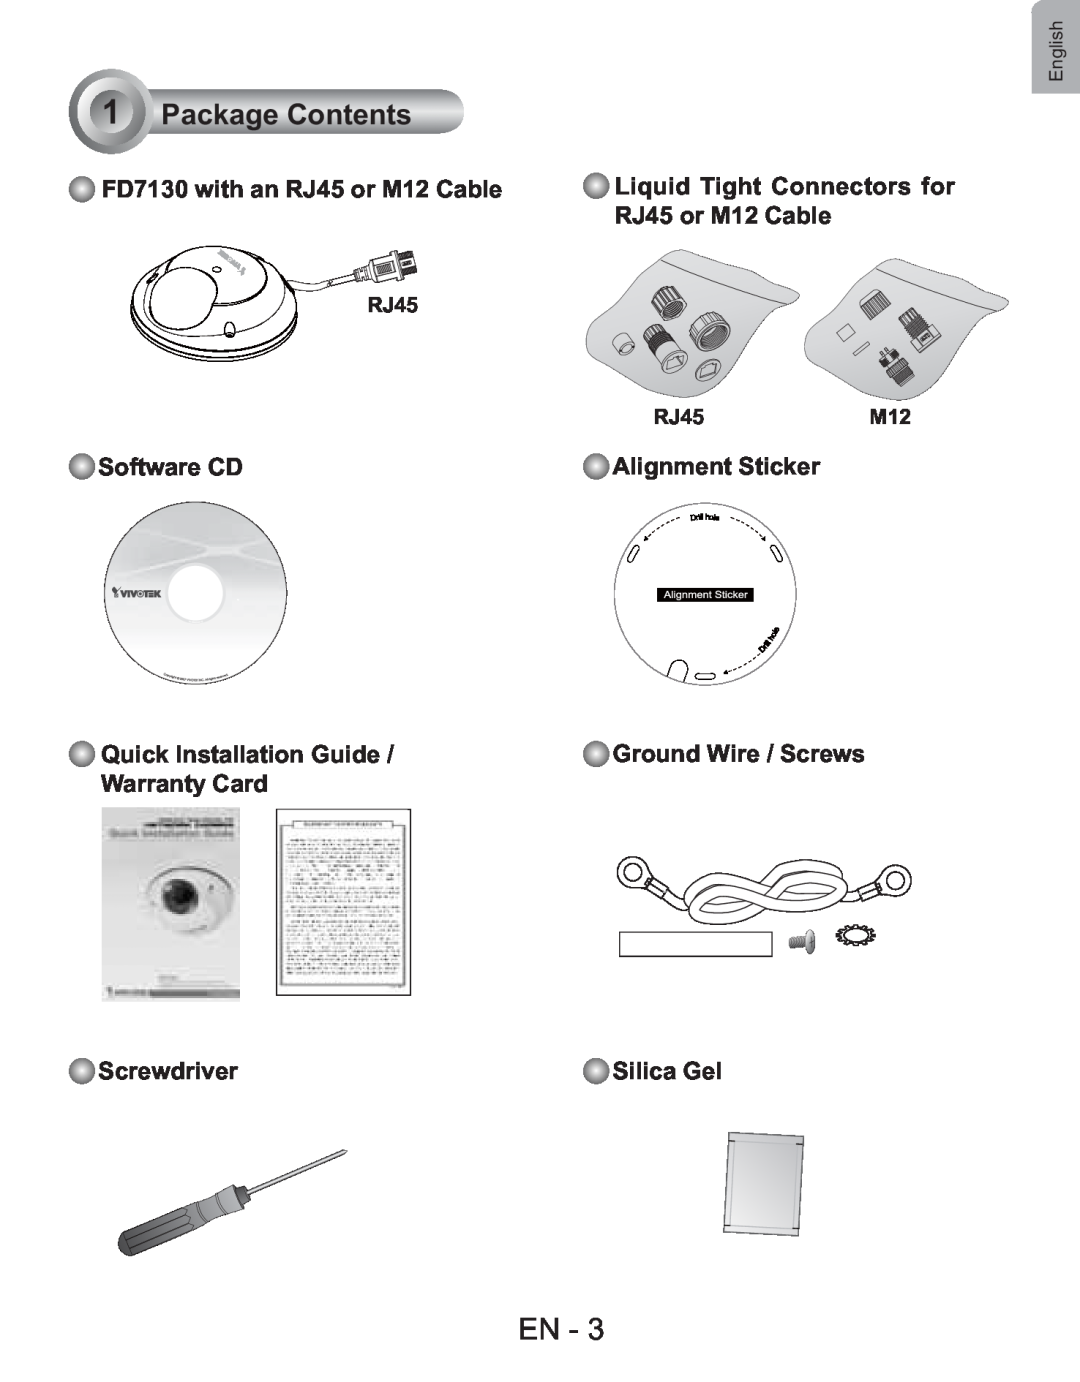 Vivotek Package Contents, FD7130 with an RJ45 or M12 Cable, Software CD, Alignment Sticker, Quick Installation Guide 